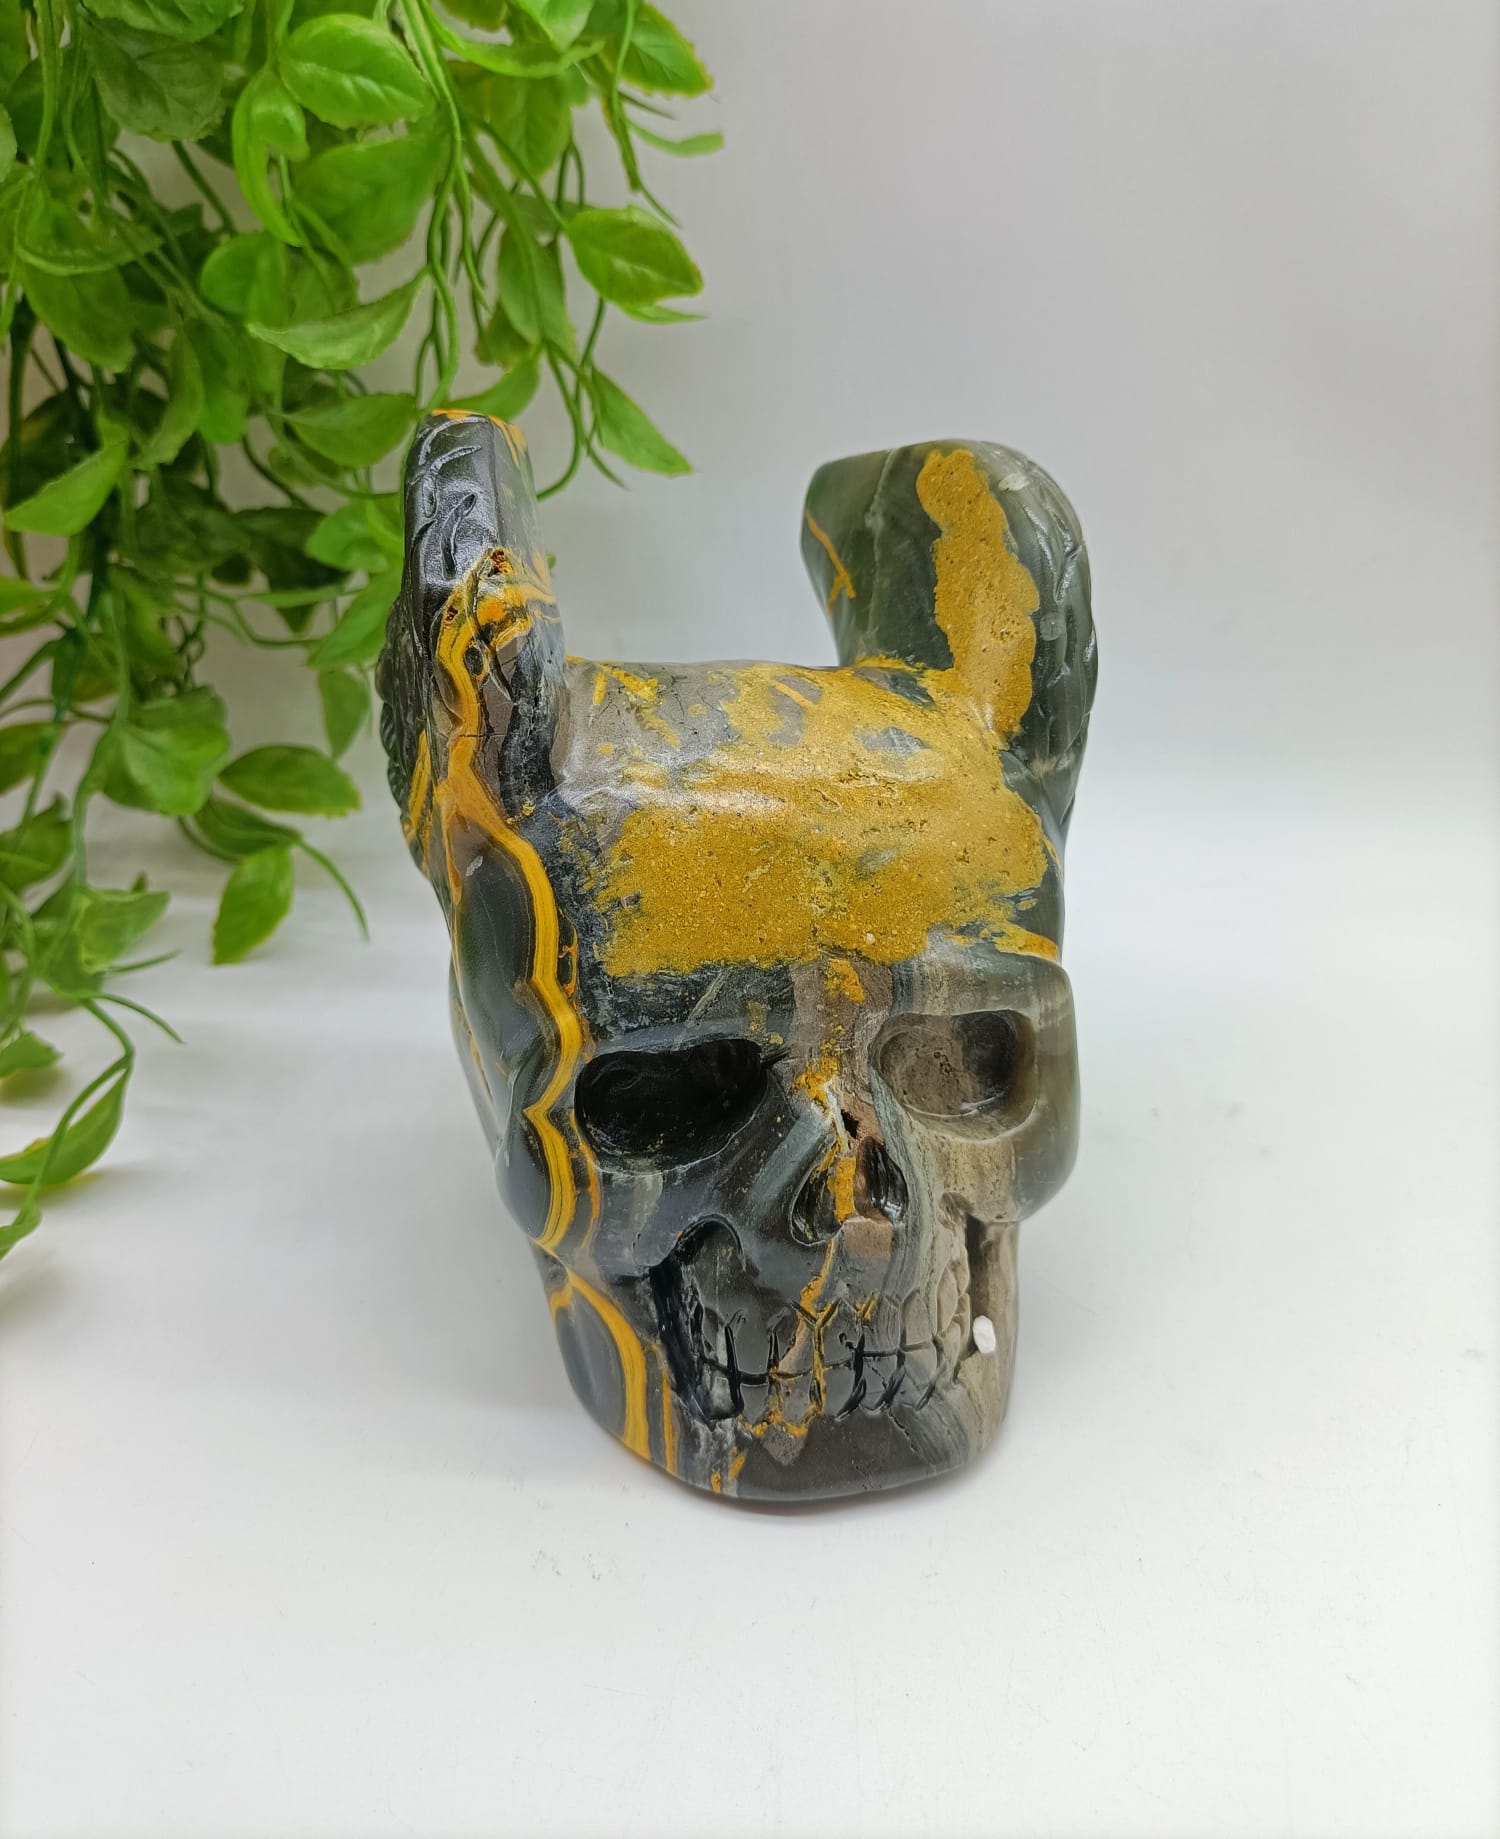 Bumblebee Jasper Skull with Wings 1.554 Kgs (Special 30% OFF)

